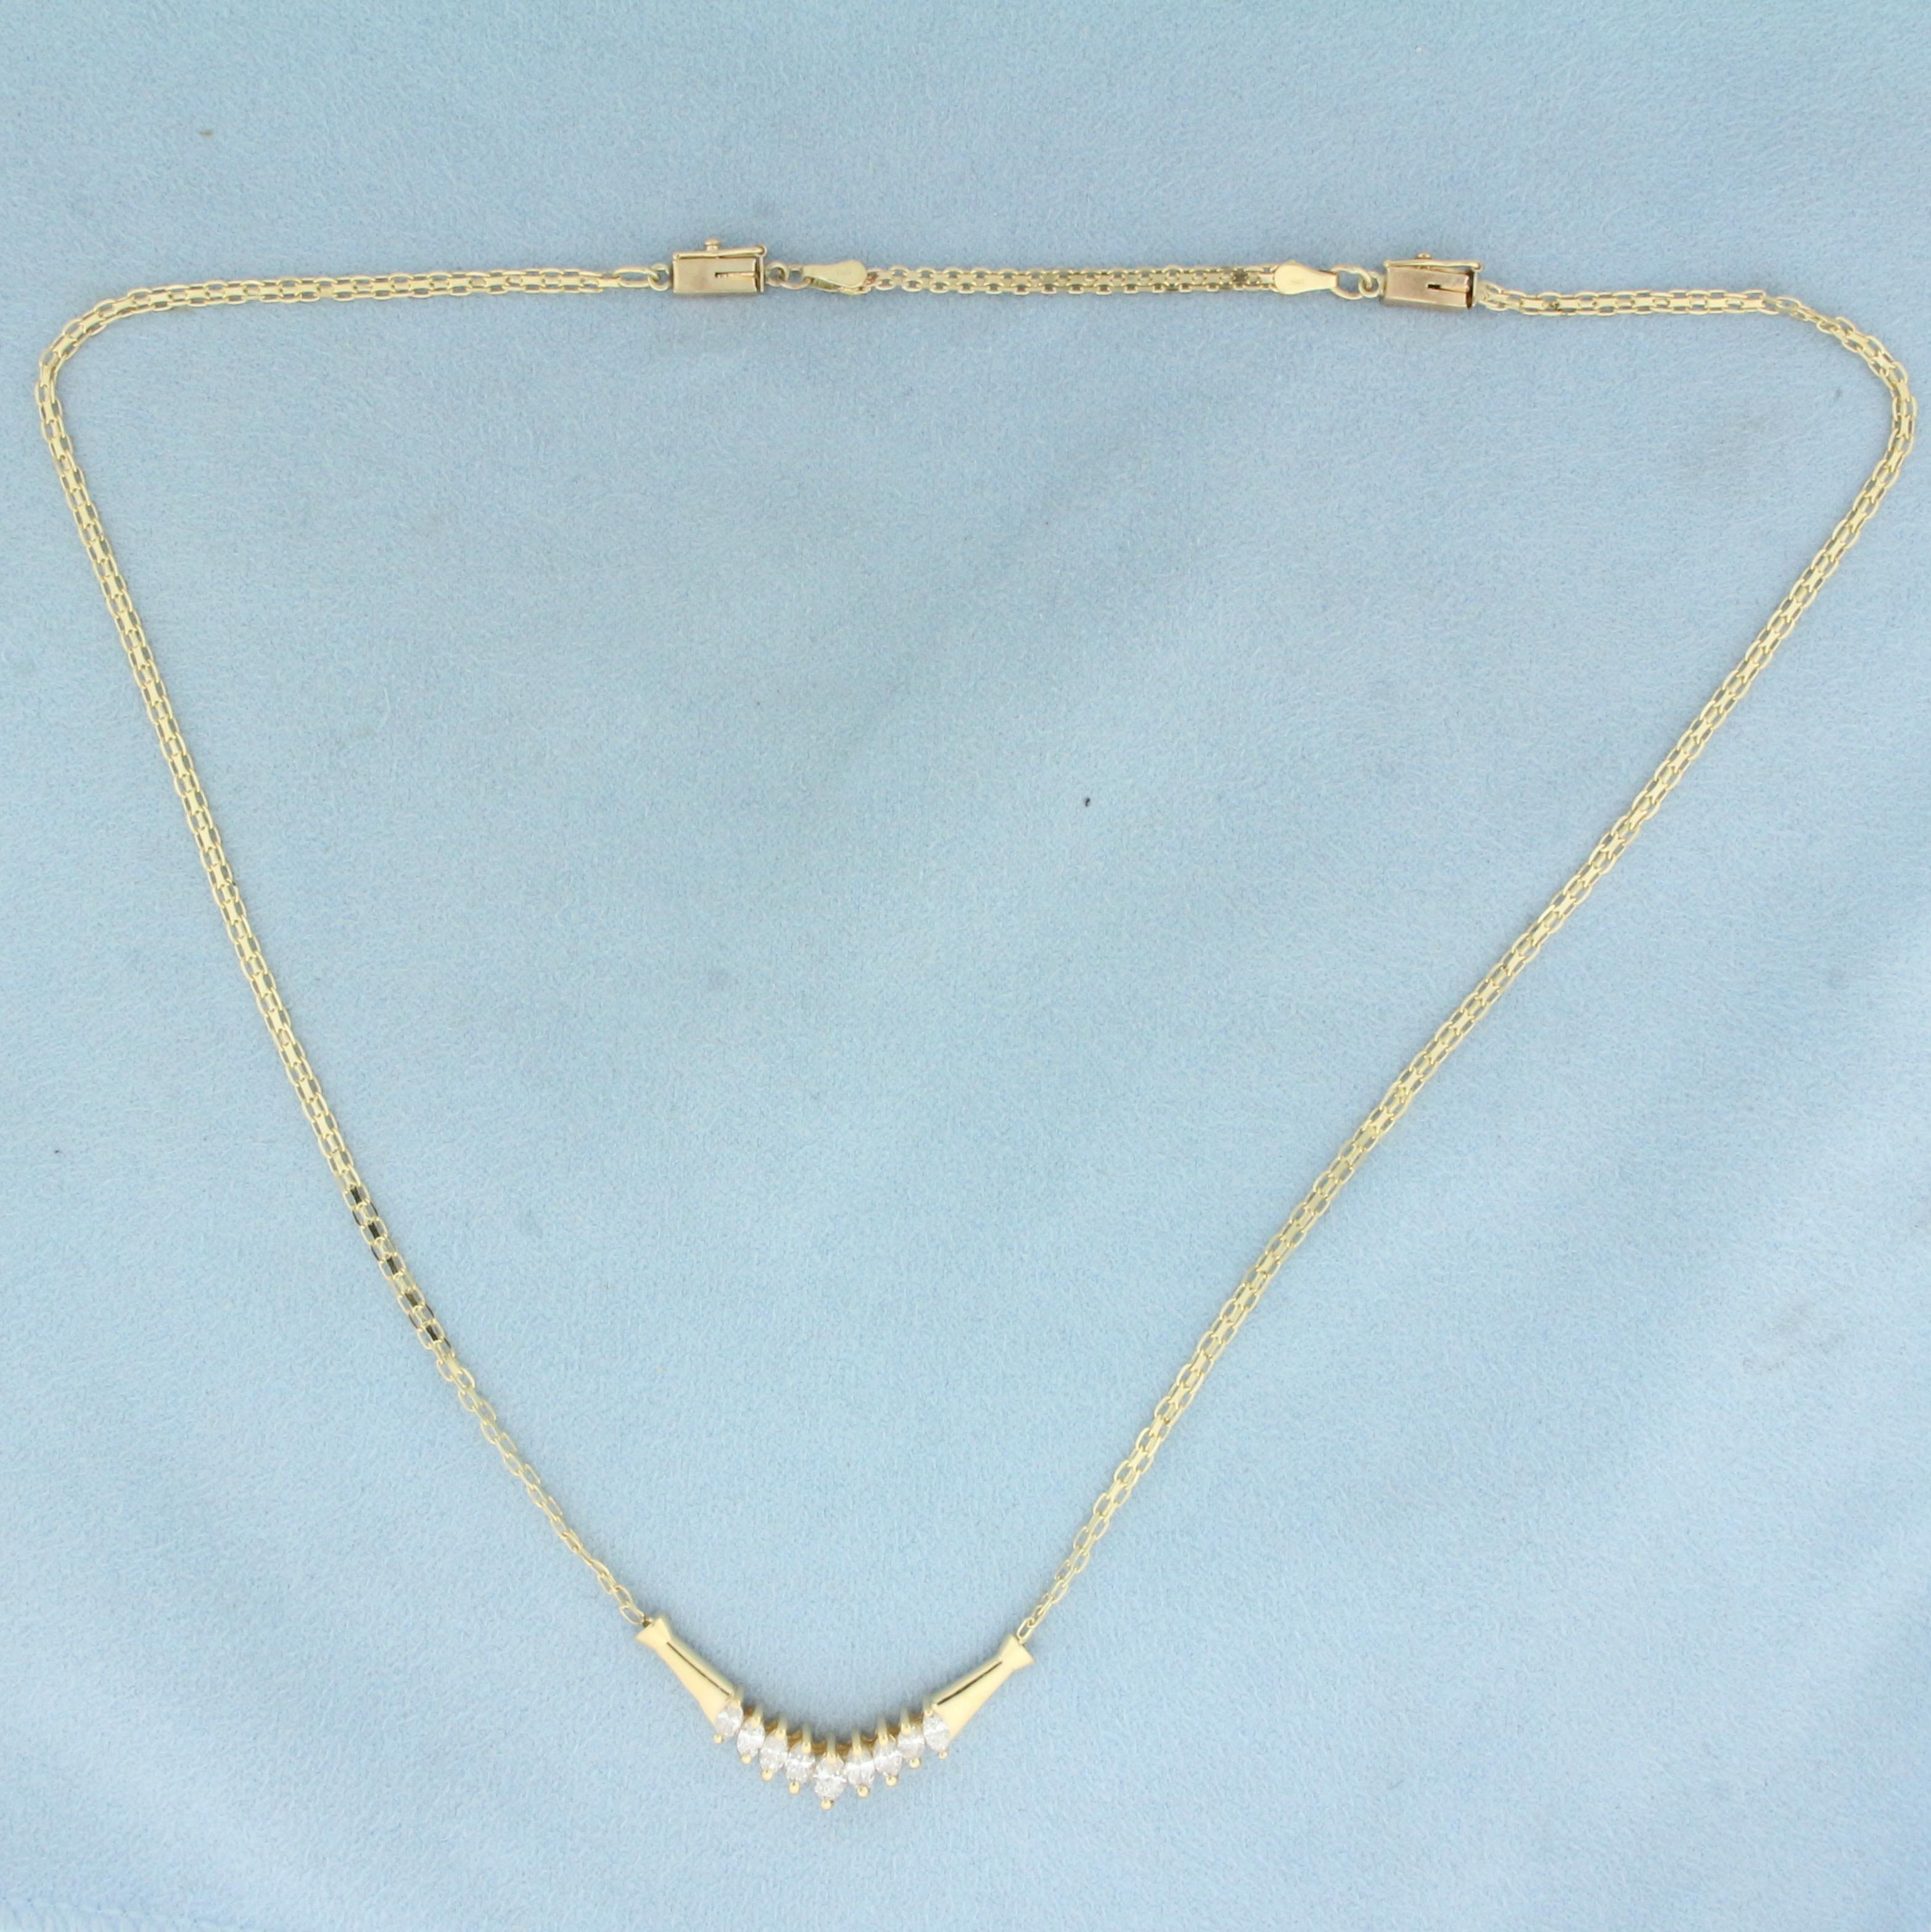 Marquise Diamond Adjustable Length Necklace In 14k Yellow Gold